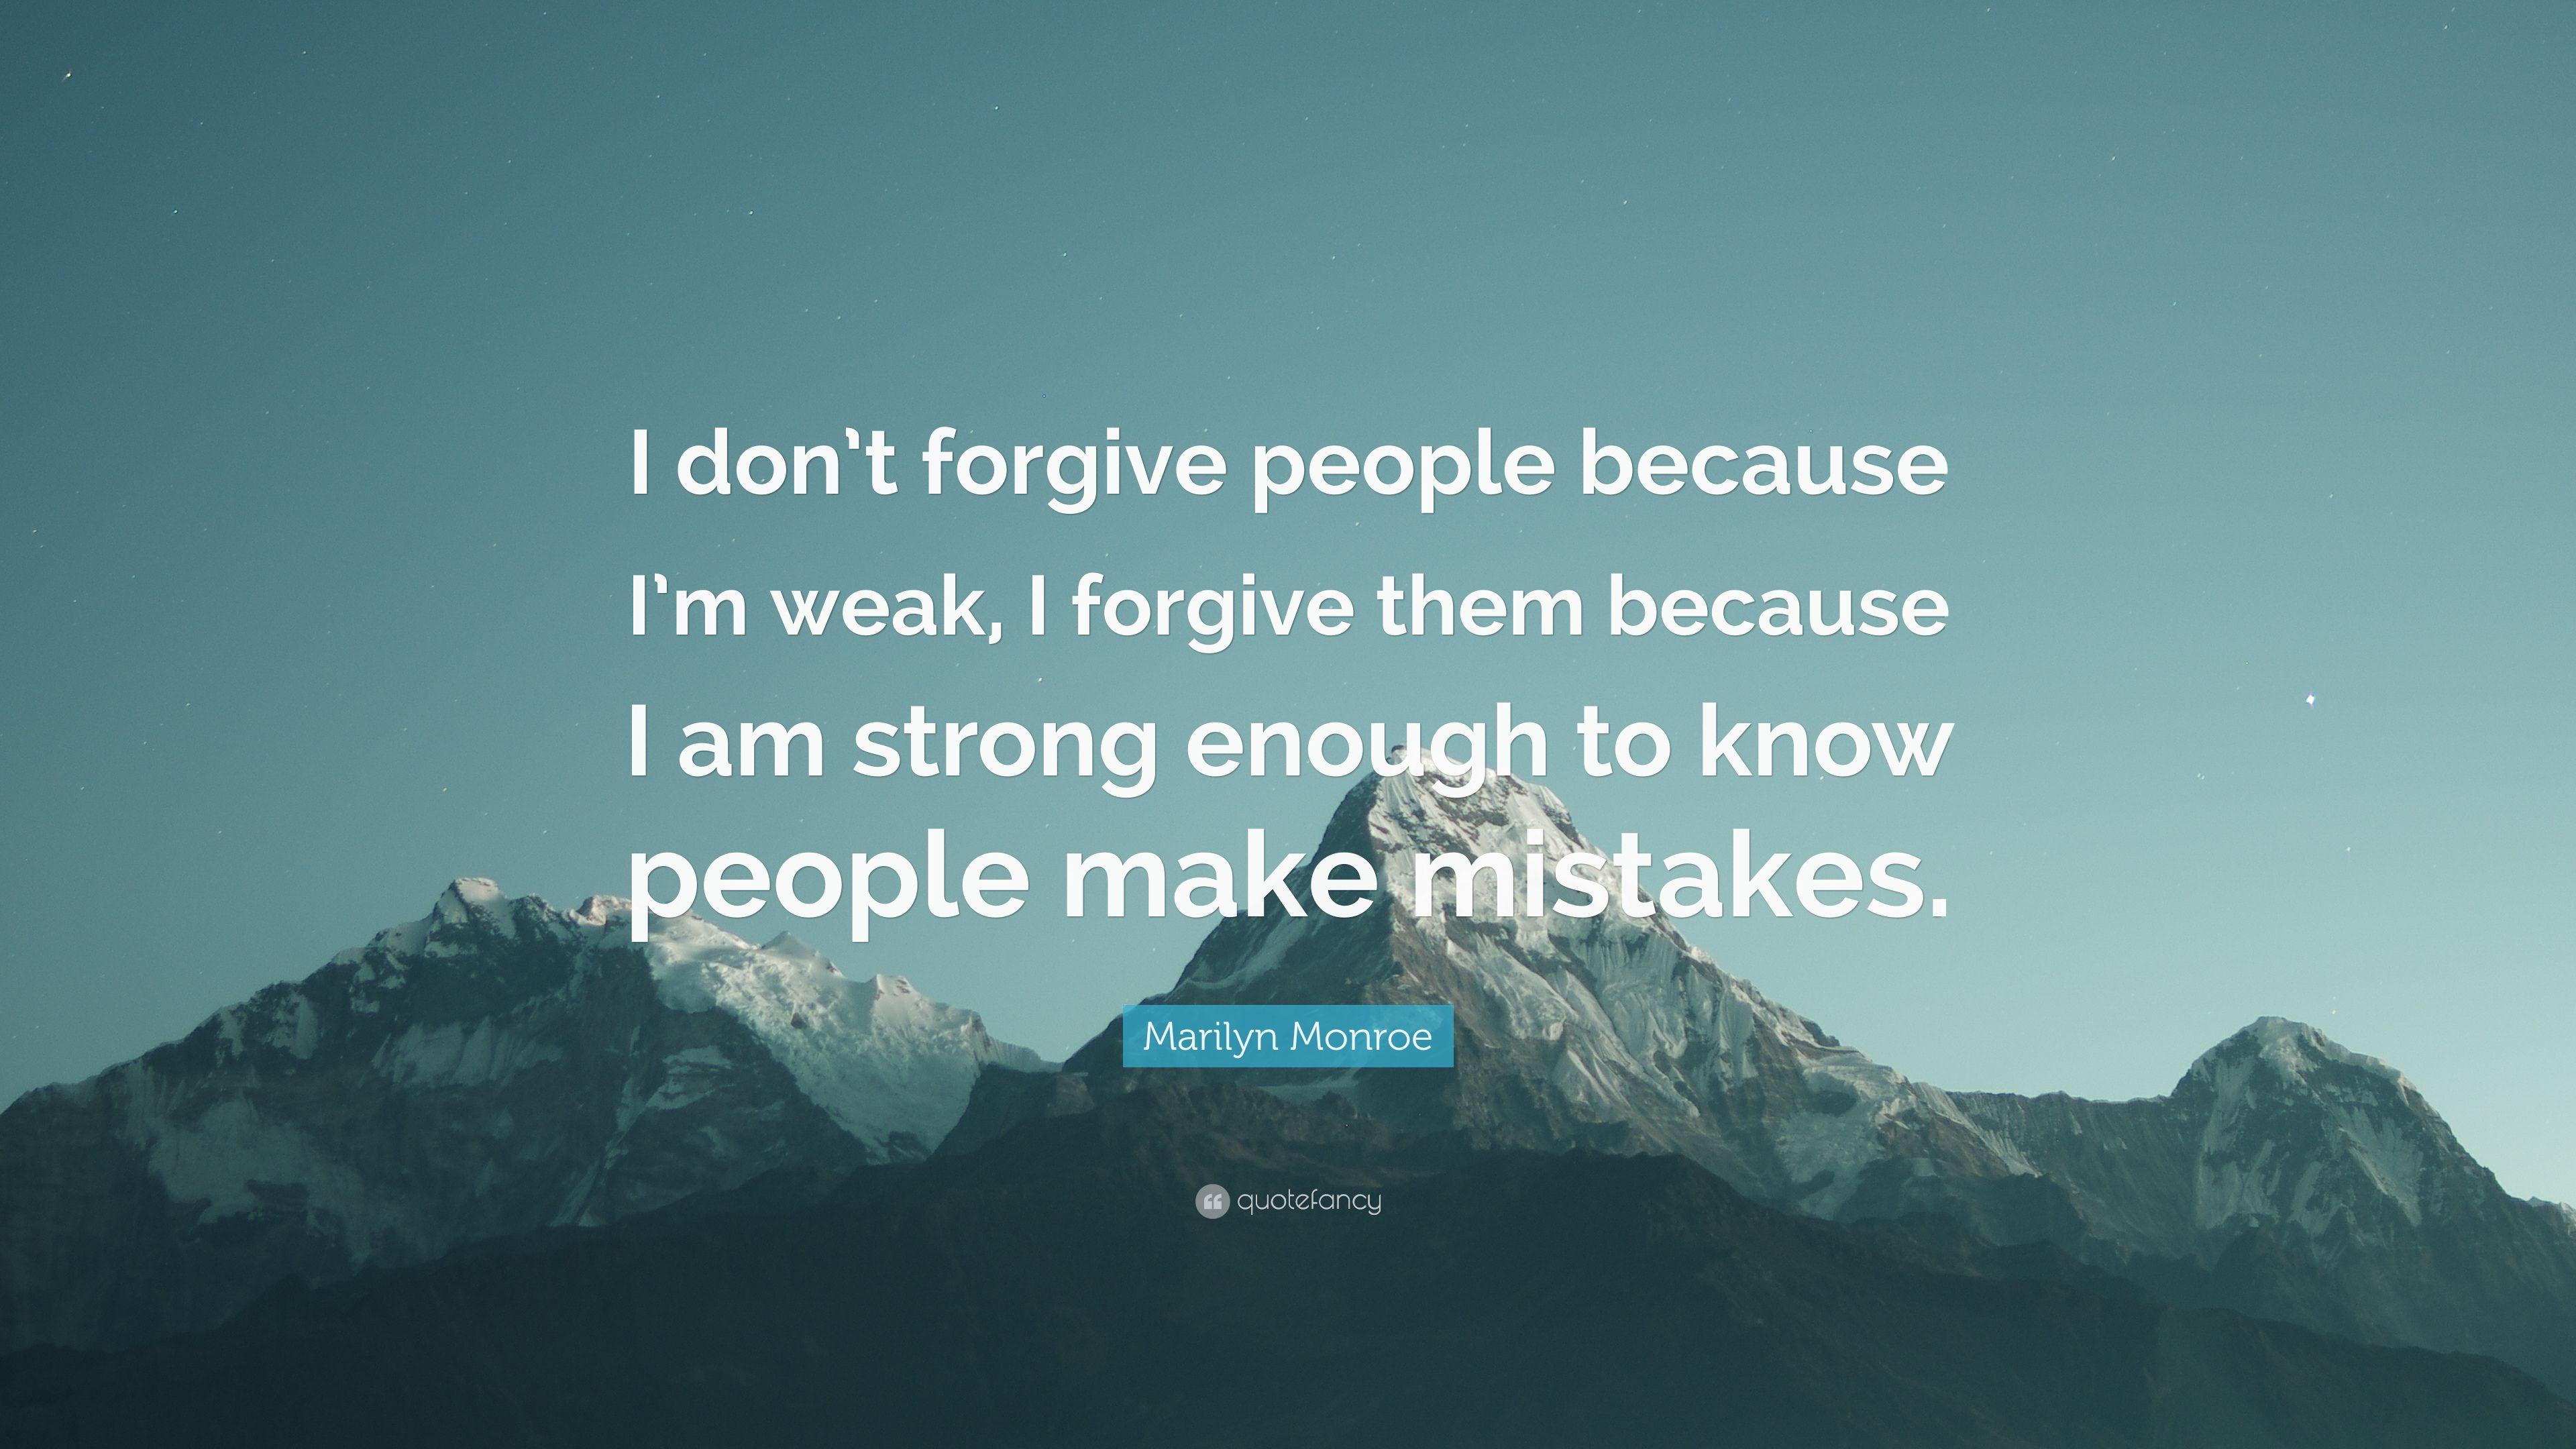 Marilyn Monroe Quote: “I don't forgive people because I'm weak, I